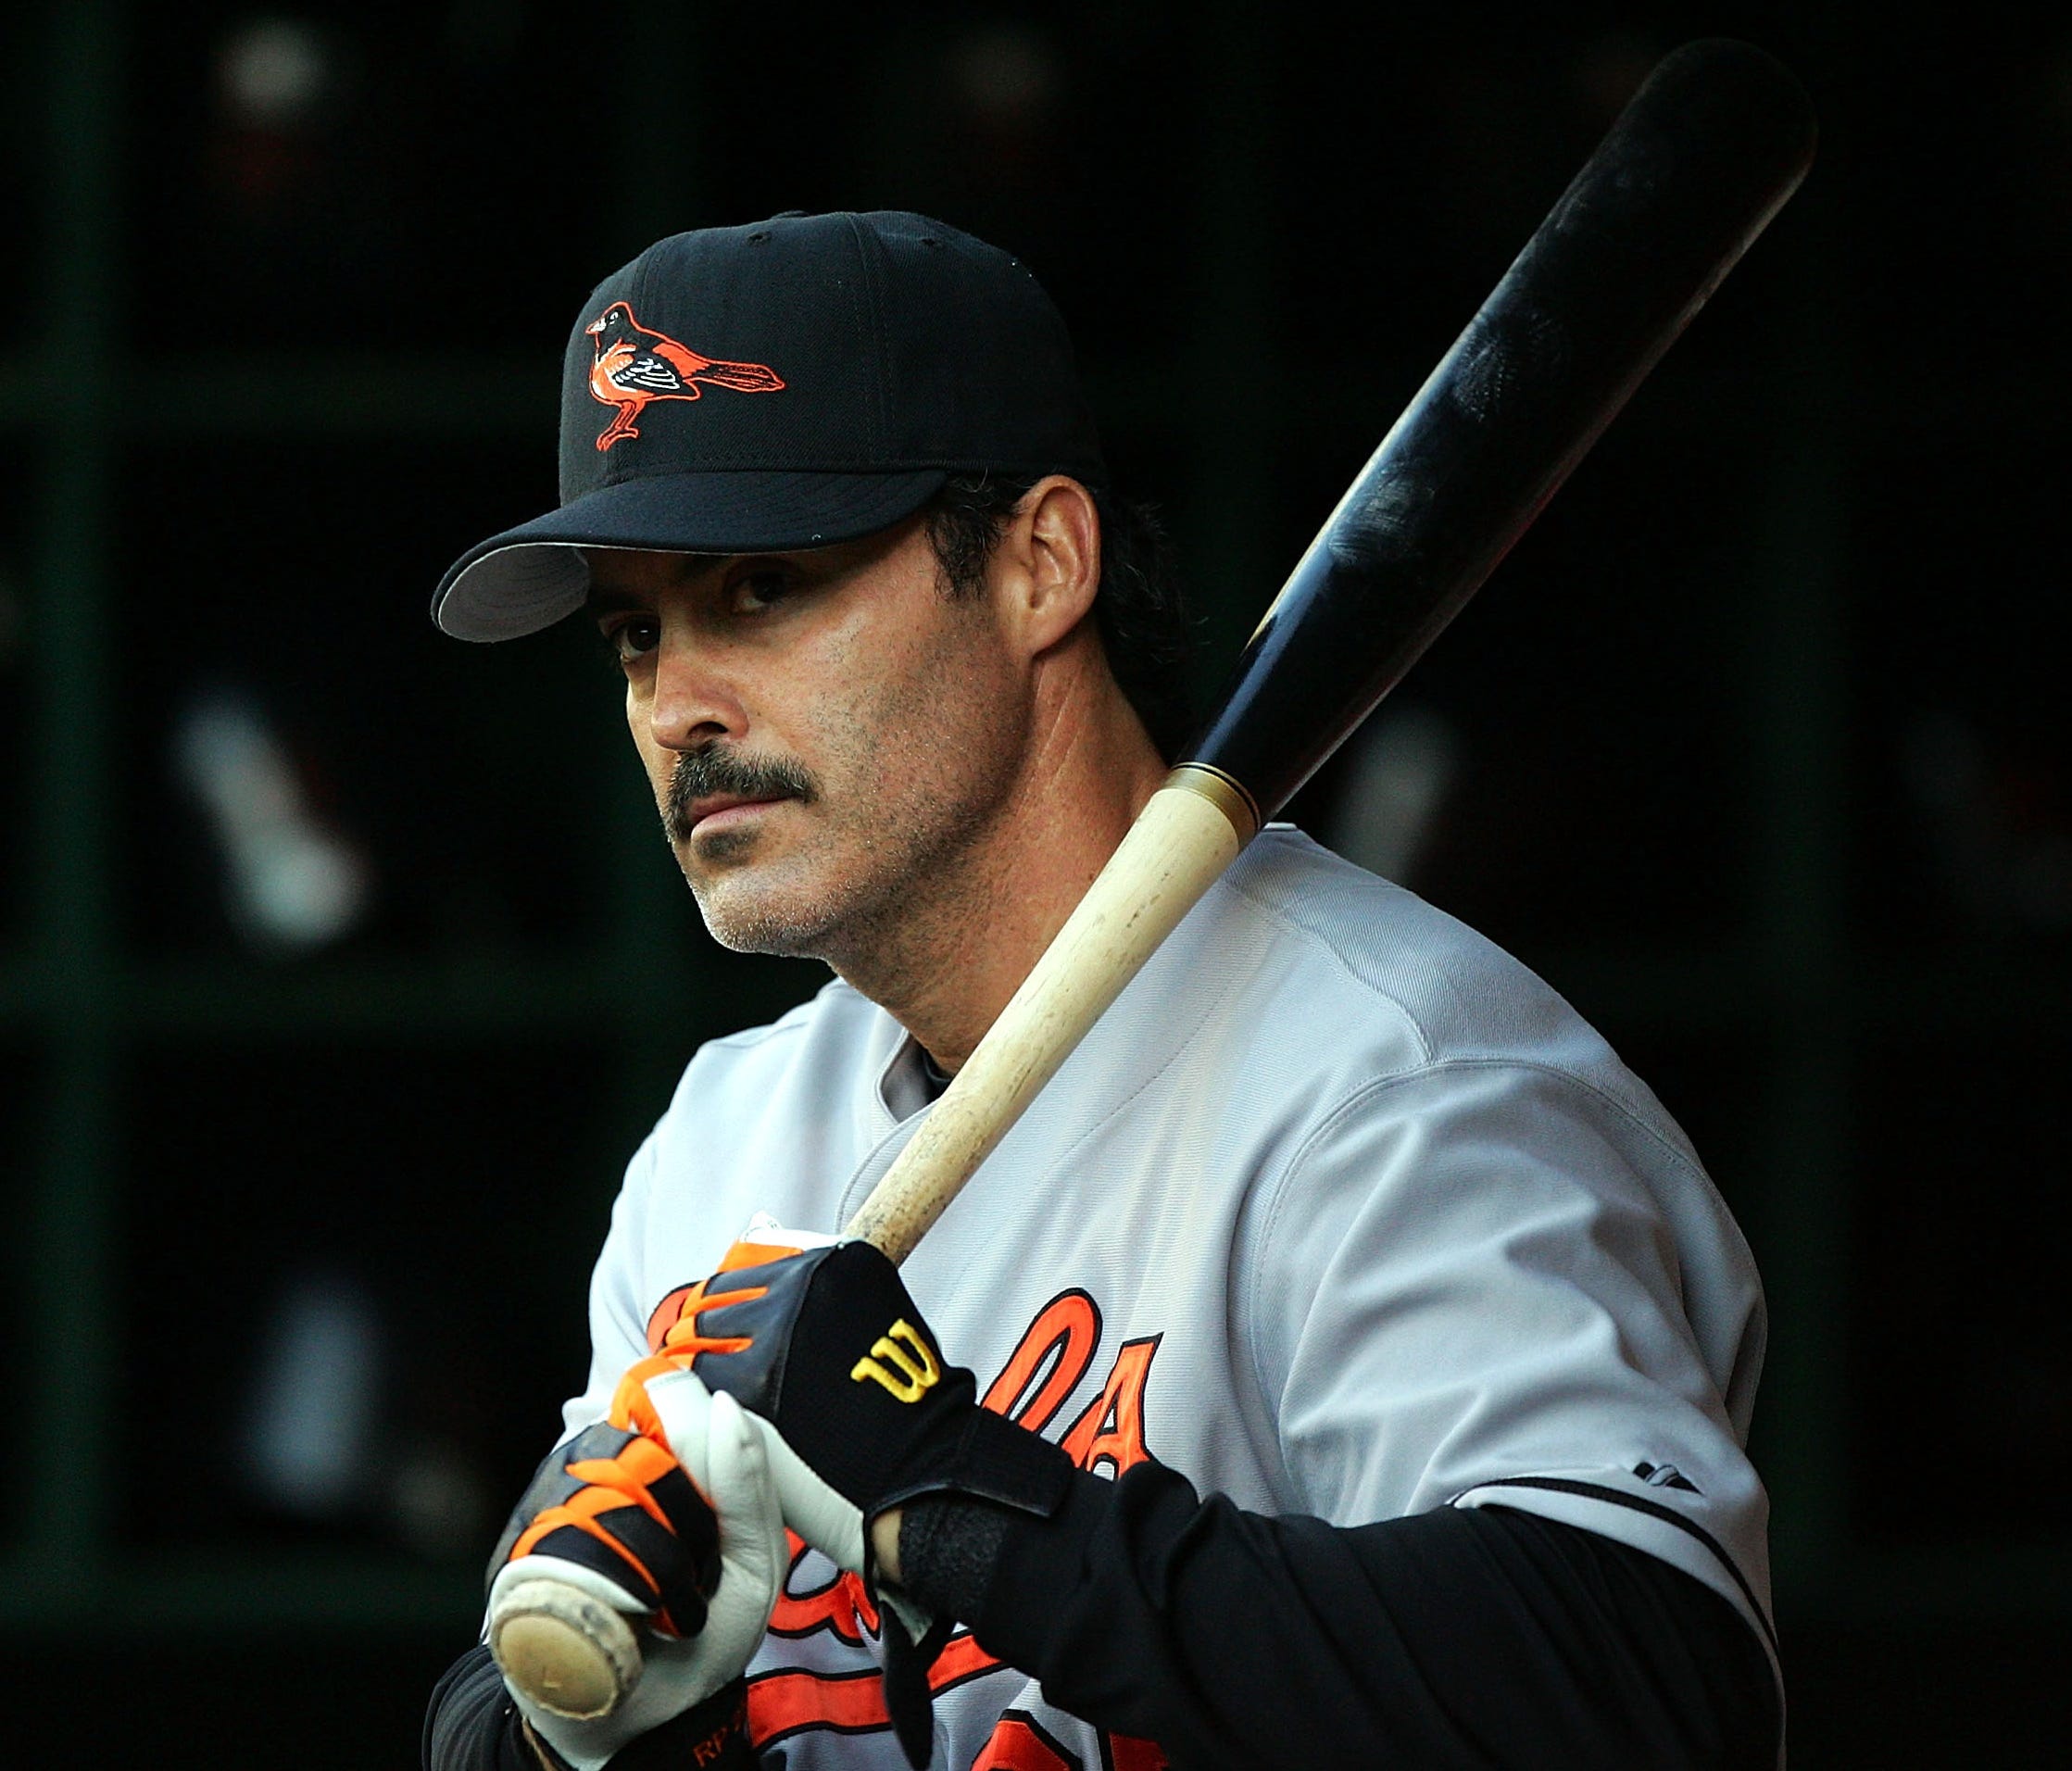 2005: Orioles slugger Rafael Palmeiro was suspended 10 days for violations of MLB's drug policy.